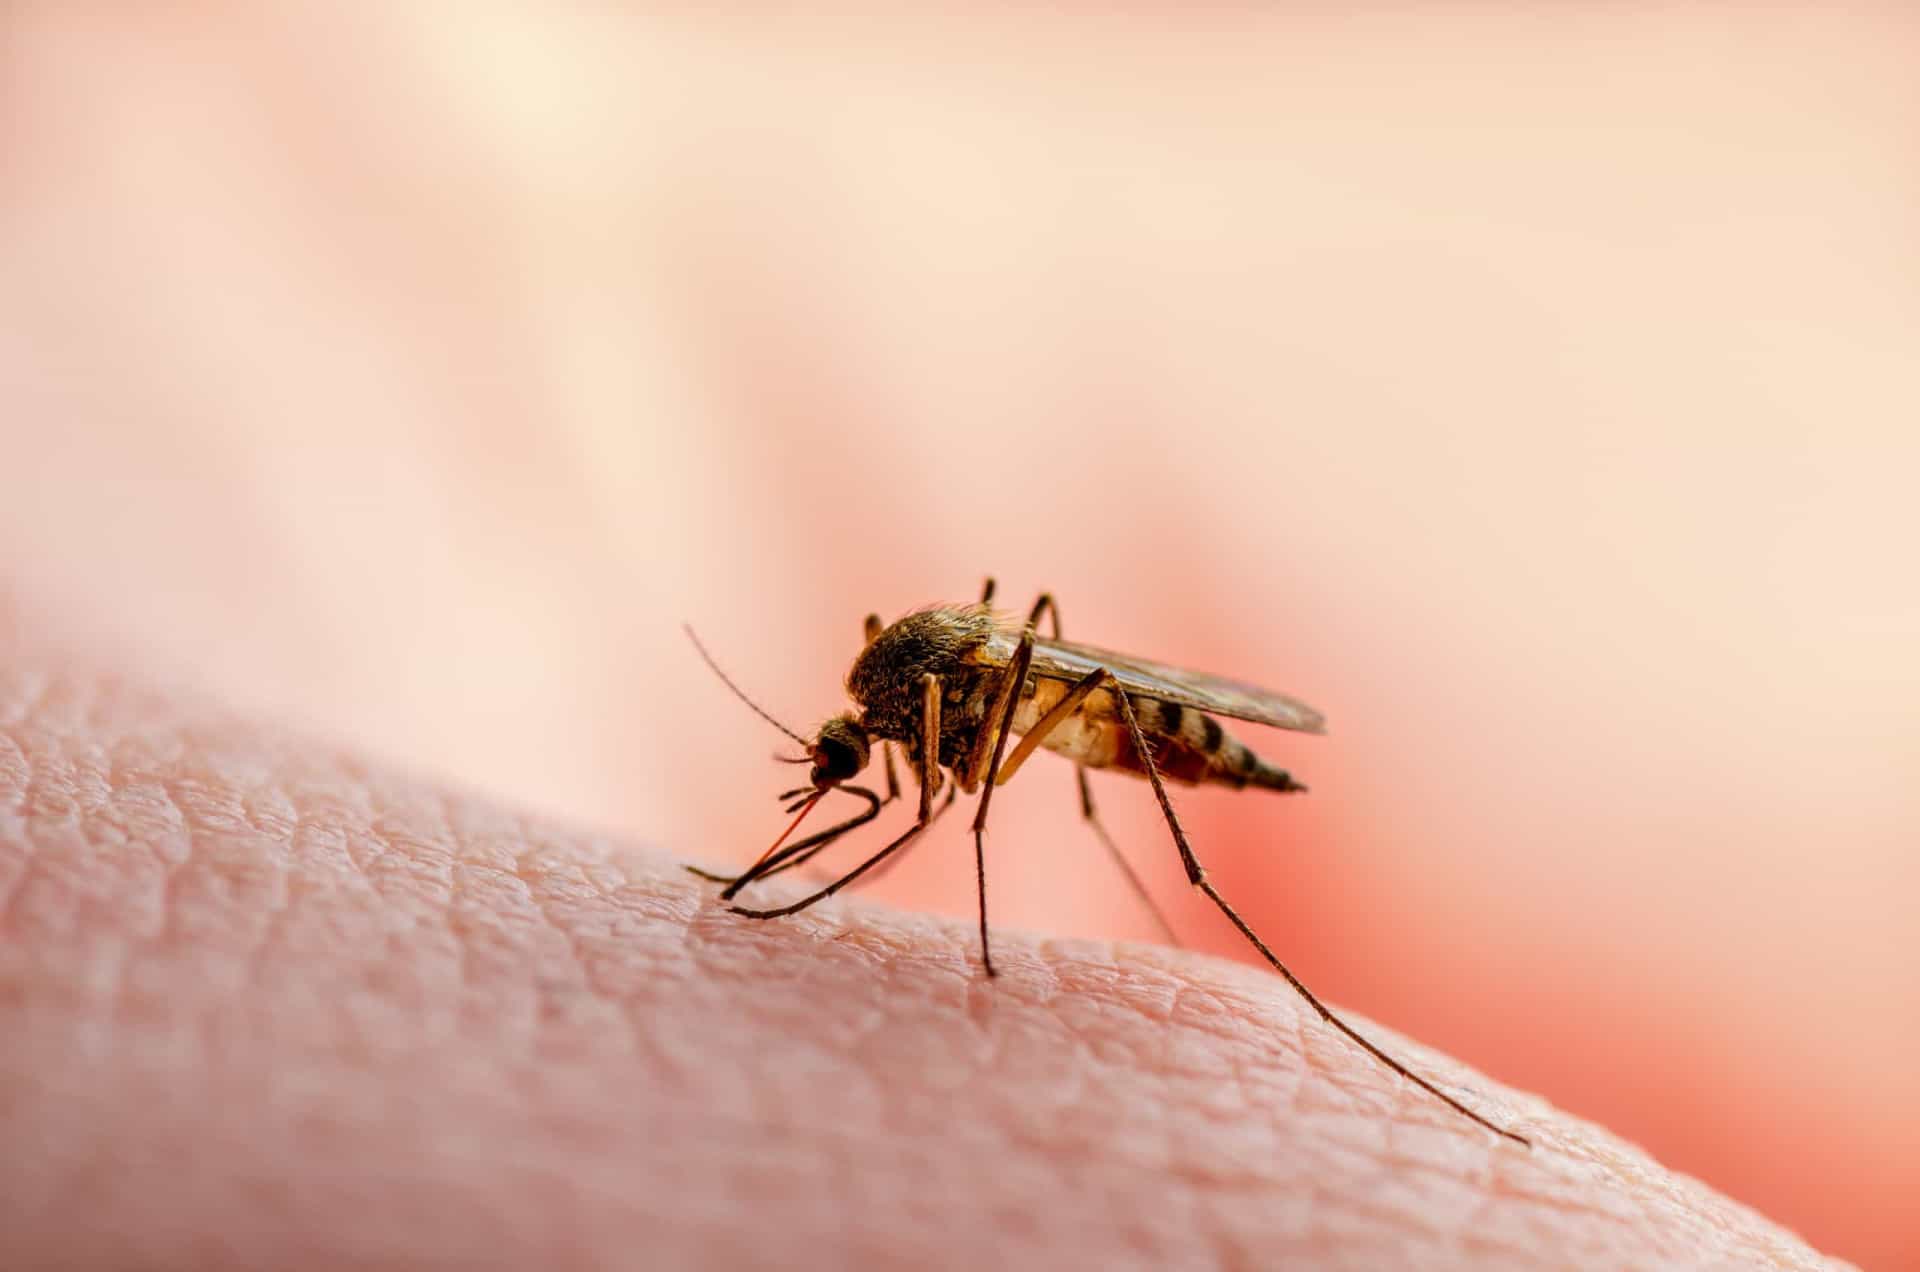 <p>You can get malaria when an infected mosquito bites you. Luckily, if you have blood type O, it's harder for the parasite to attach to the cells.</p><p><a href="https://www.msn.com/en-us/community/channel/vid-7xx8mnucu55yw63we9va2gwr7uihbxwc68fxqp25x6tg4ftibpra?cvid=94631541bc0f4f89bfd59158d696ad7e">Follow us and access great exclusive content everyday</a></p>